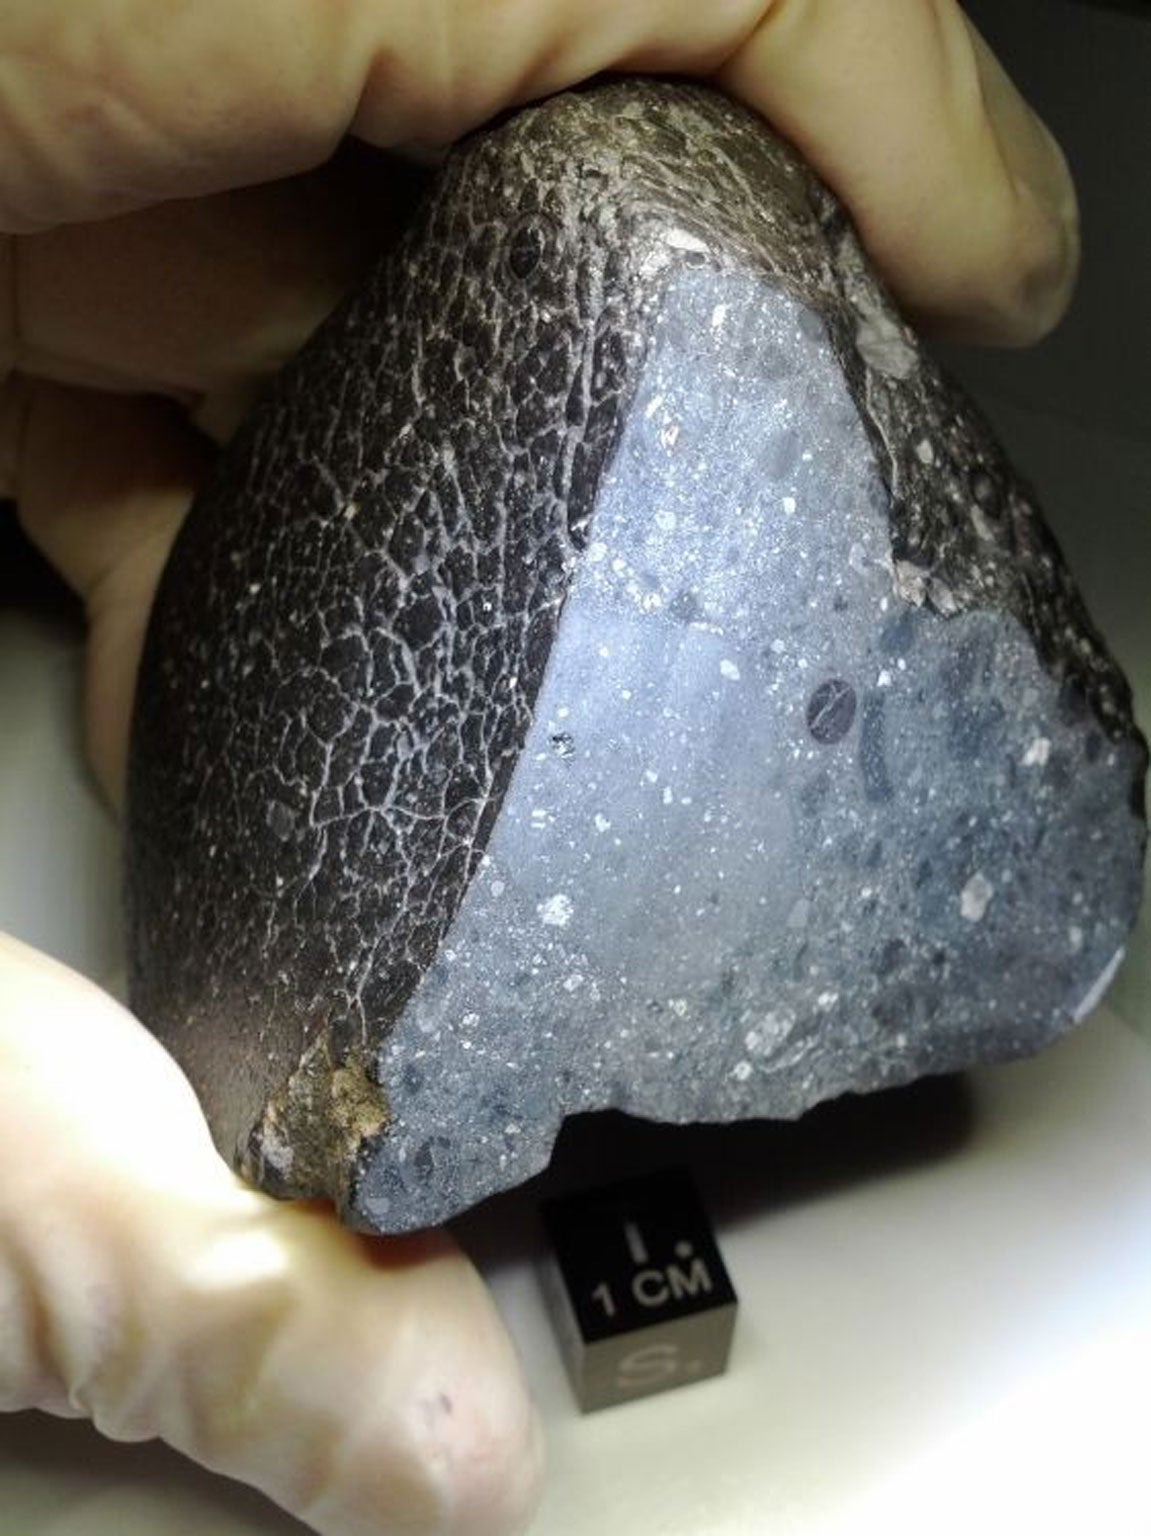 The Martian meteorite known as NWA 7034 is 2.1 billion years old and is water-rich